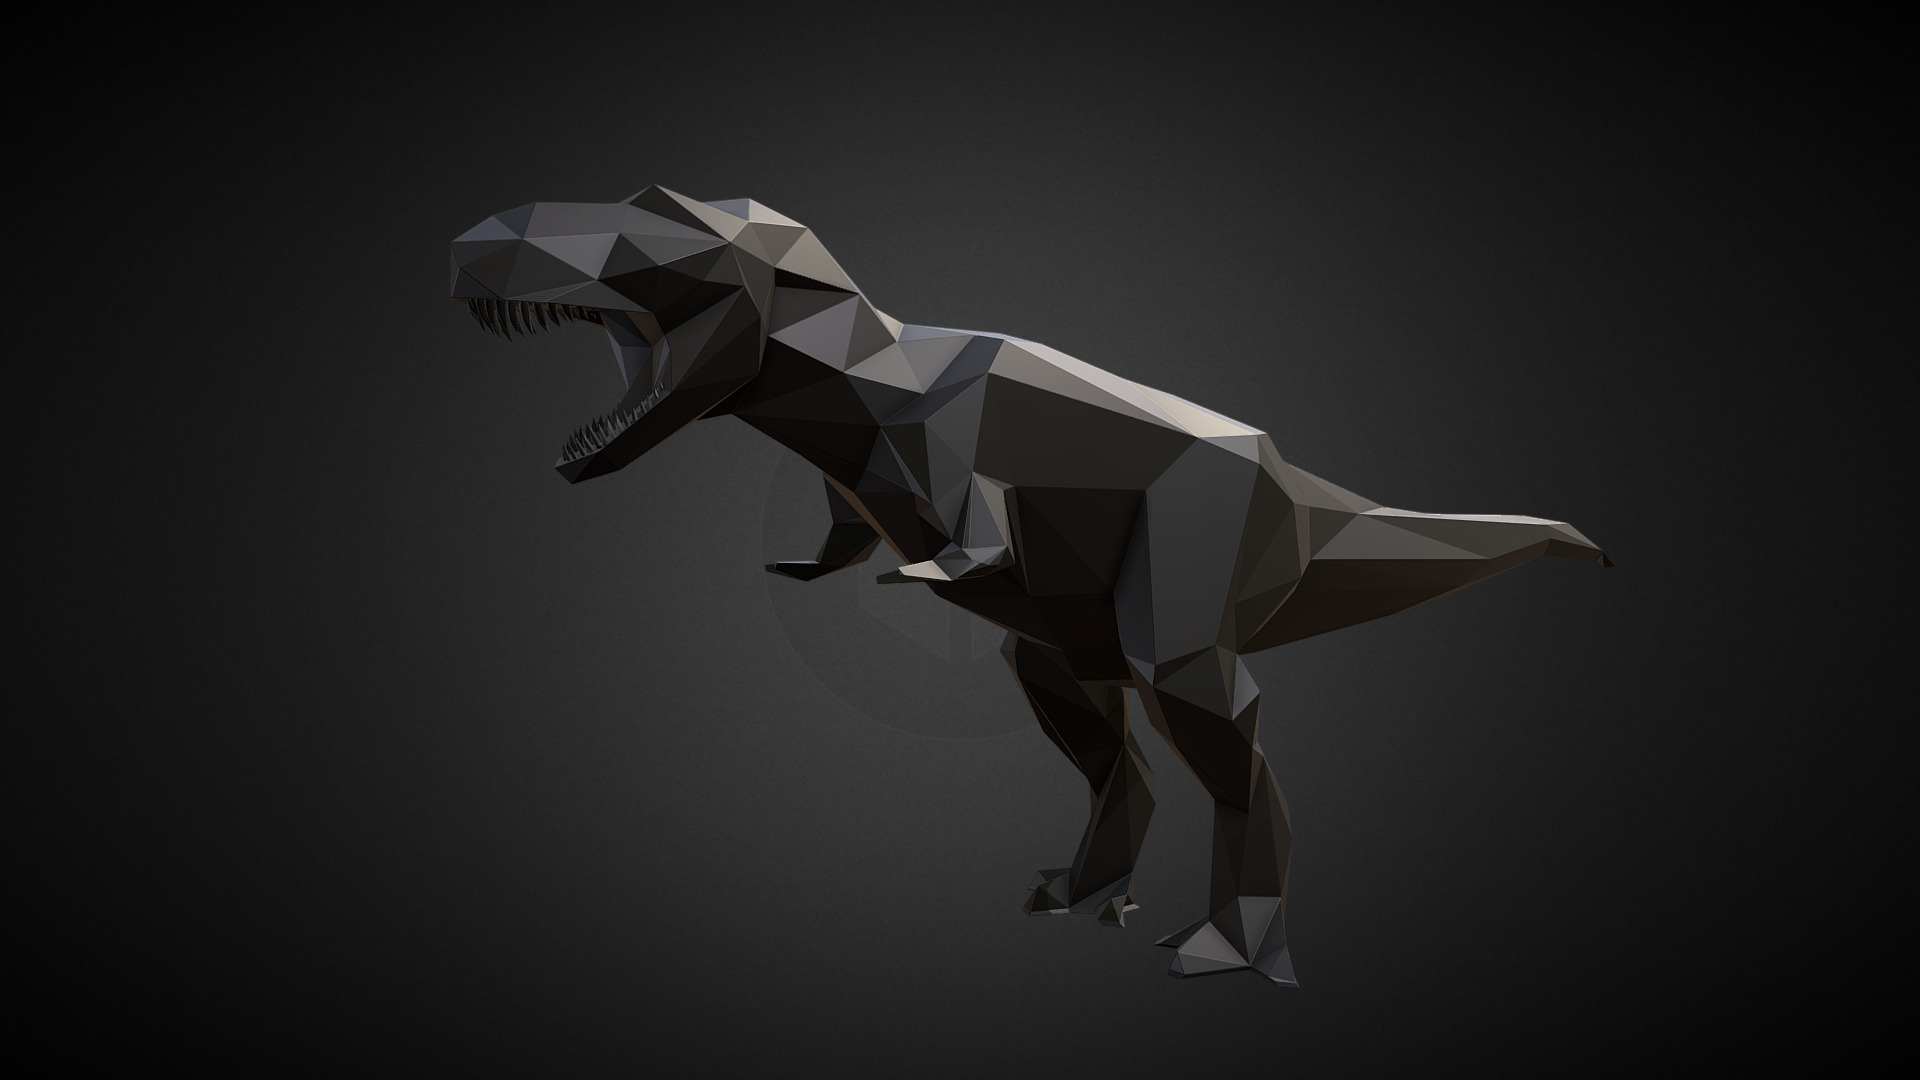 3D model Geometric T-Rex – Low-poly - This is a 3D model of the Geometric T-Rex - Low-poly. The 3D model is about a paper cut out of a horse.